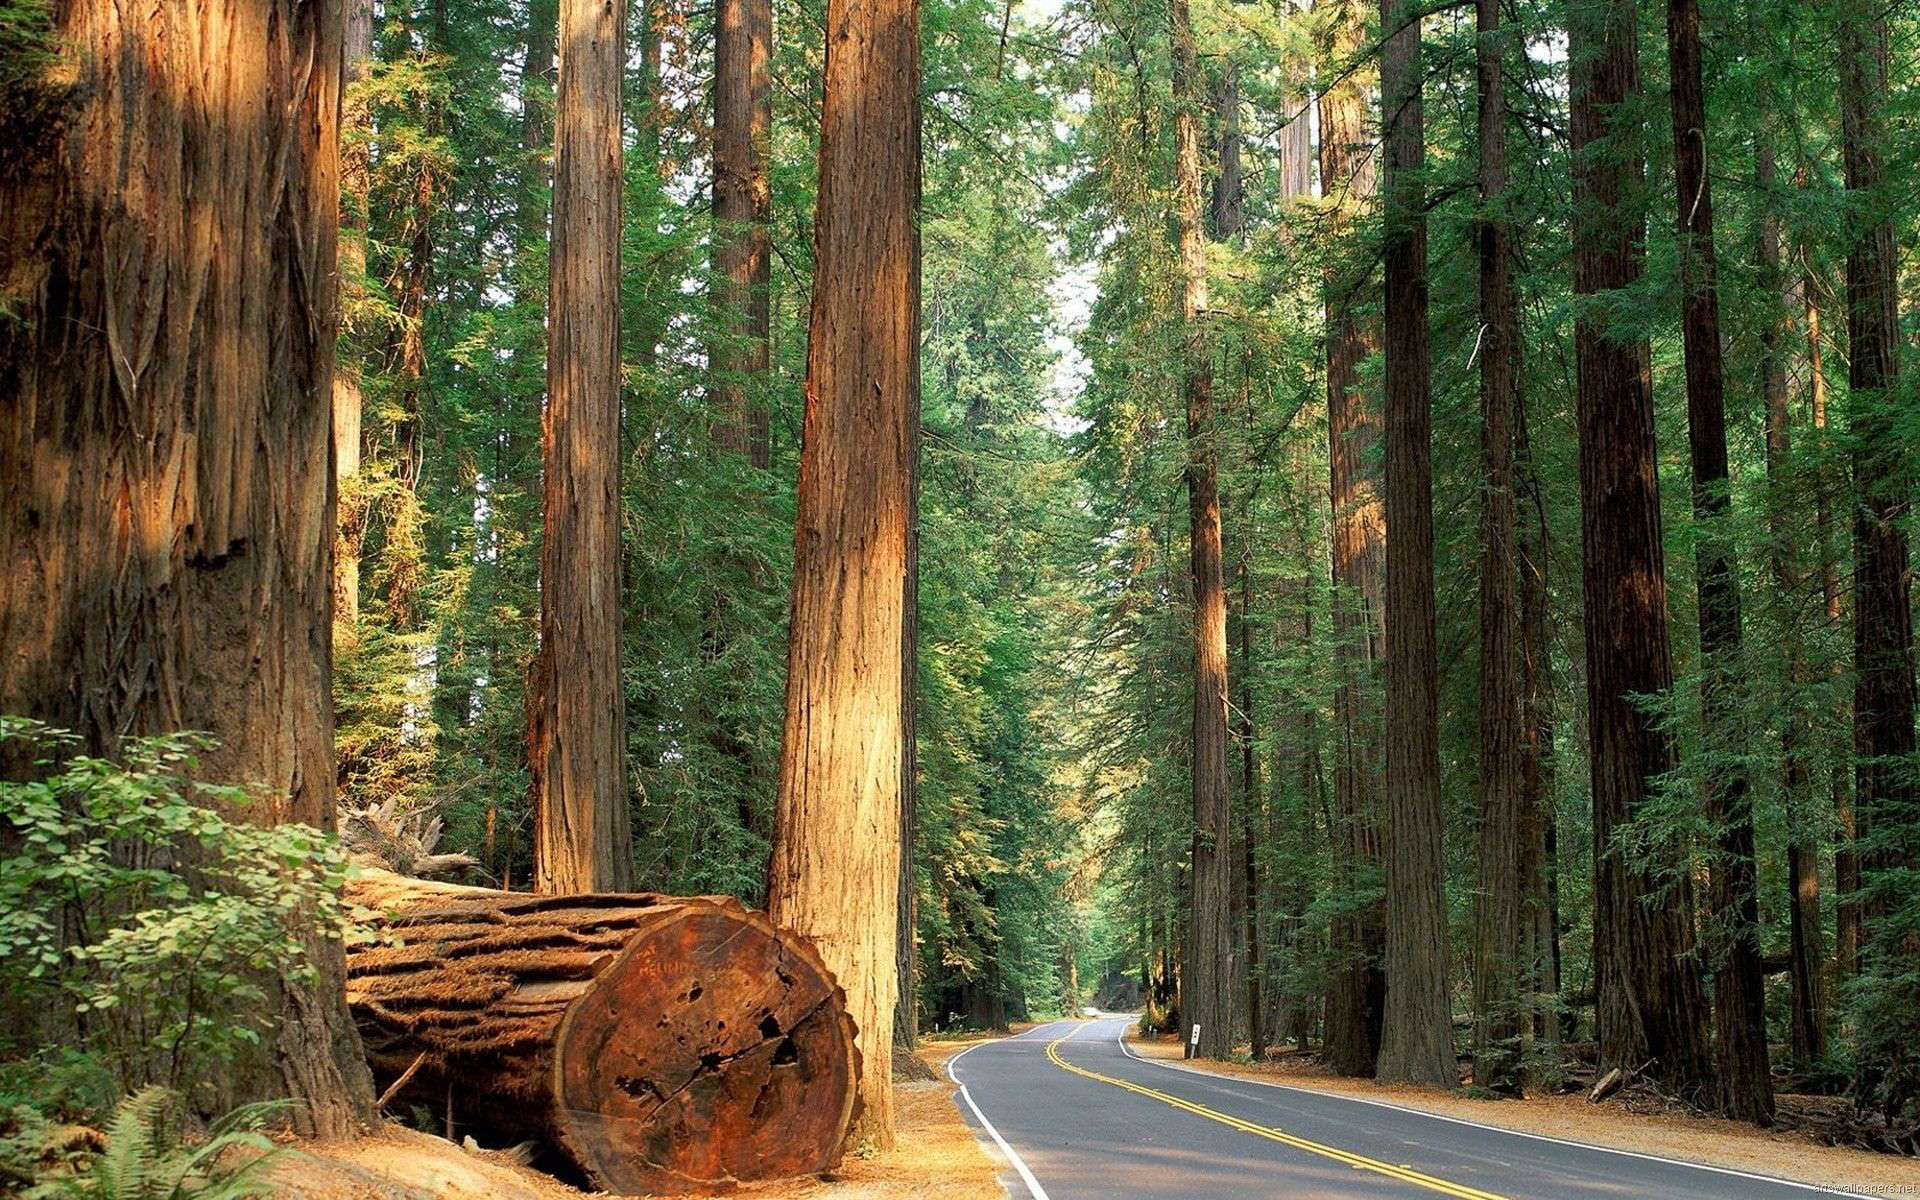 1920x1200 Sequoia National Park Wallpapers In HD Quality - HD Wallpapers Inx